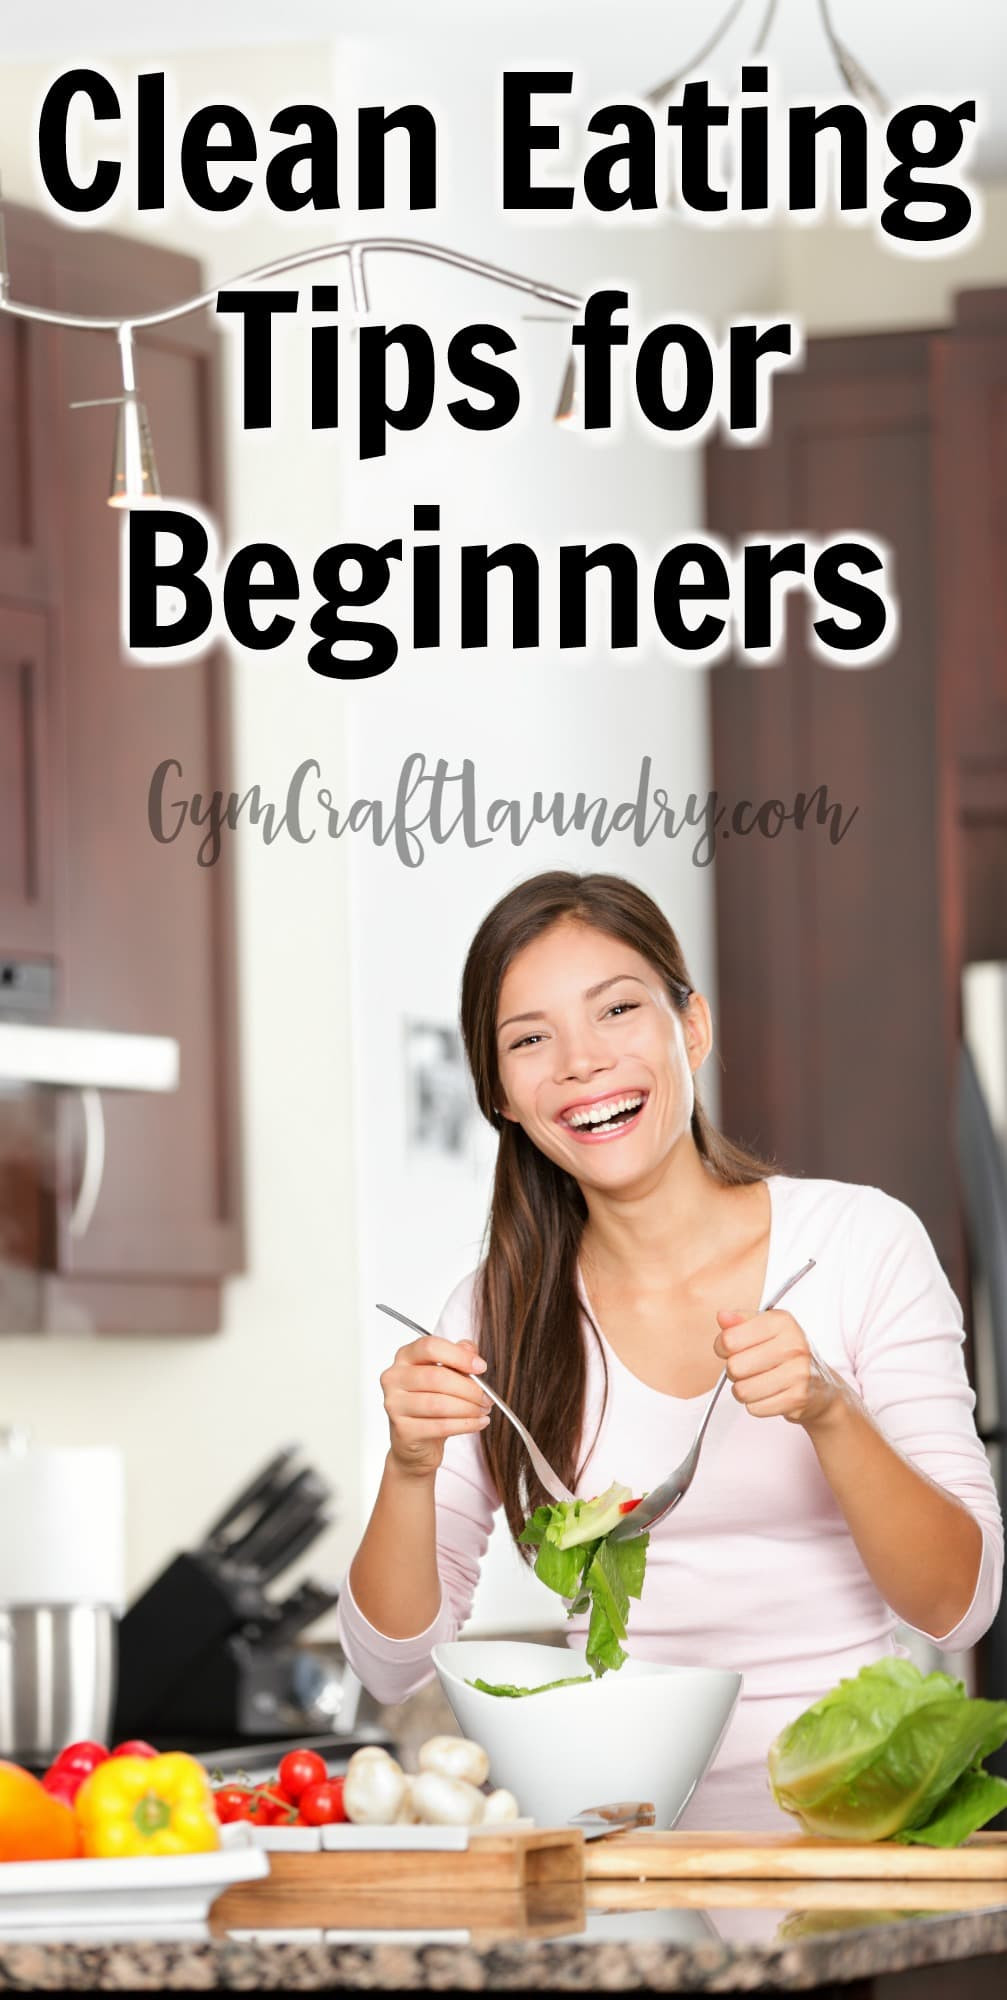 Clean Eating Tips
 Clean Eating Tips for Beginners Gym Craft Laundry